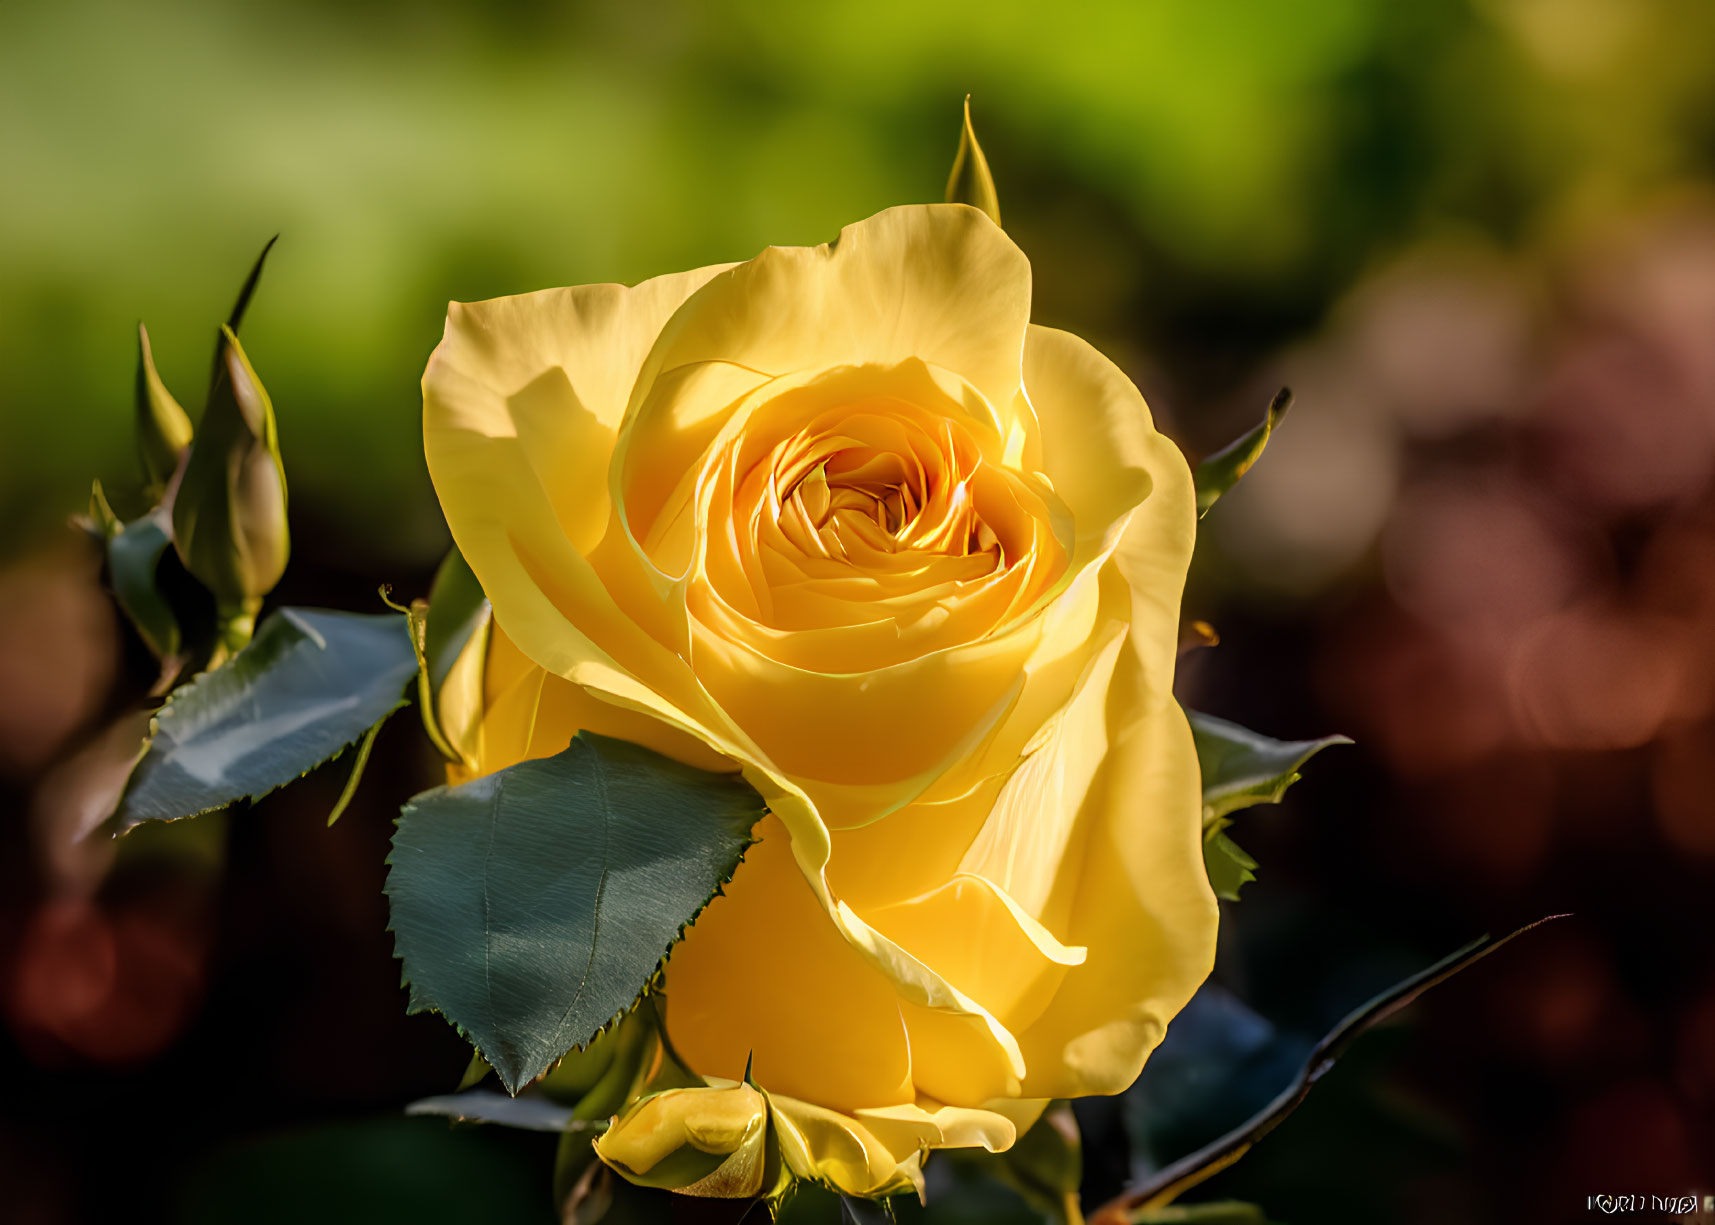 Bright yellow rose in full bloom against soft green background.